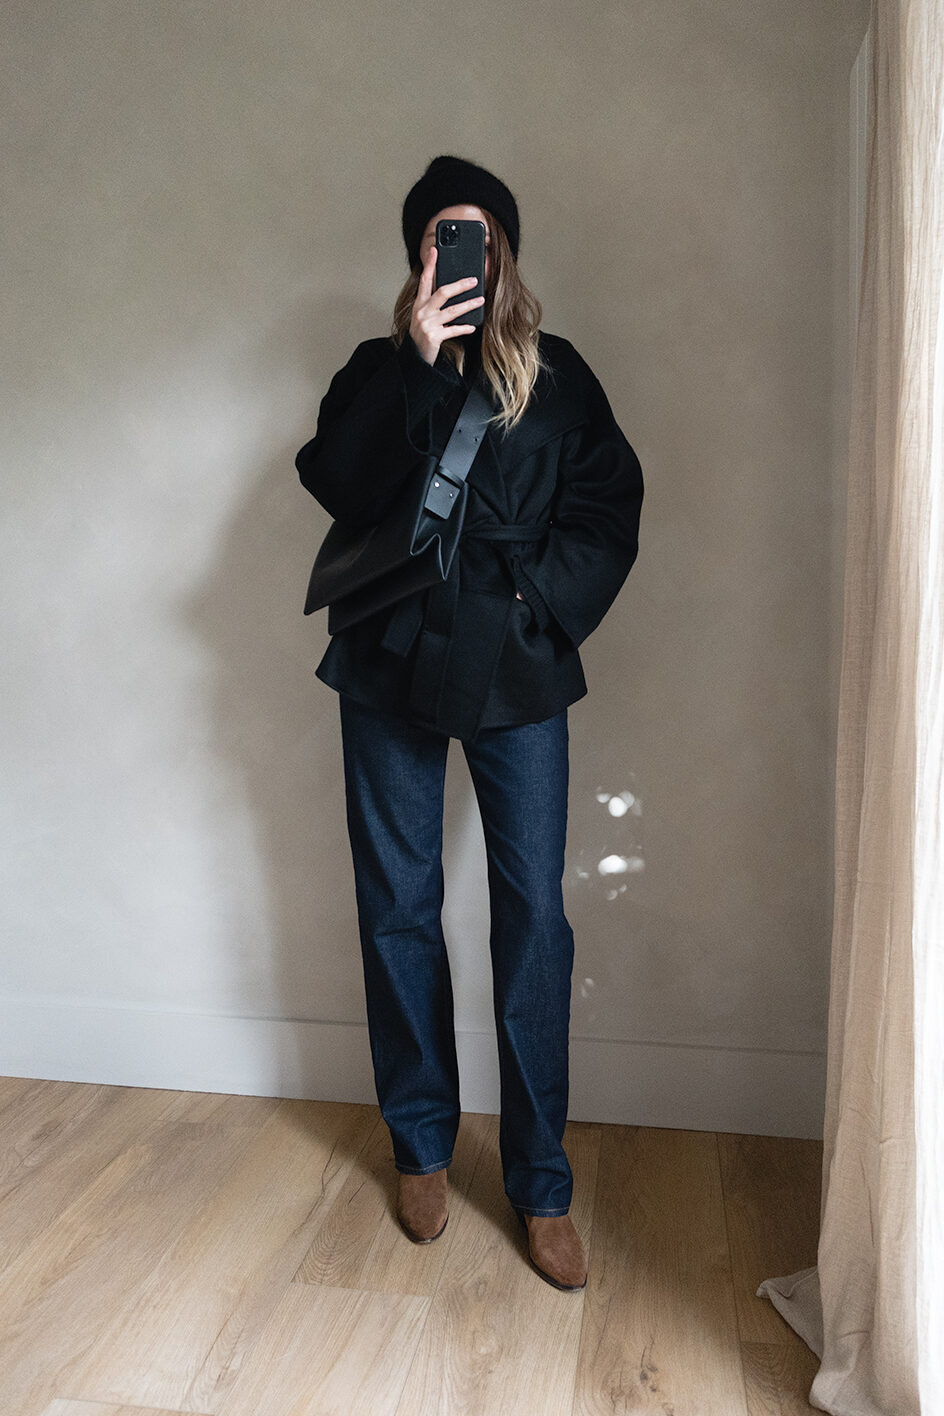 Emma Hill style. Black beanie hat, black wrap jacket, black cross body bag, dark wash straight leg jeans, tan suede ankle boots. Chic Autumn Winter outfit